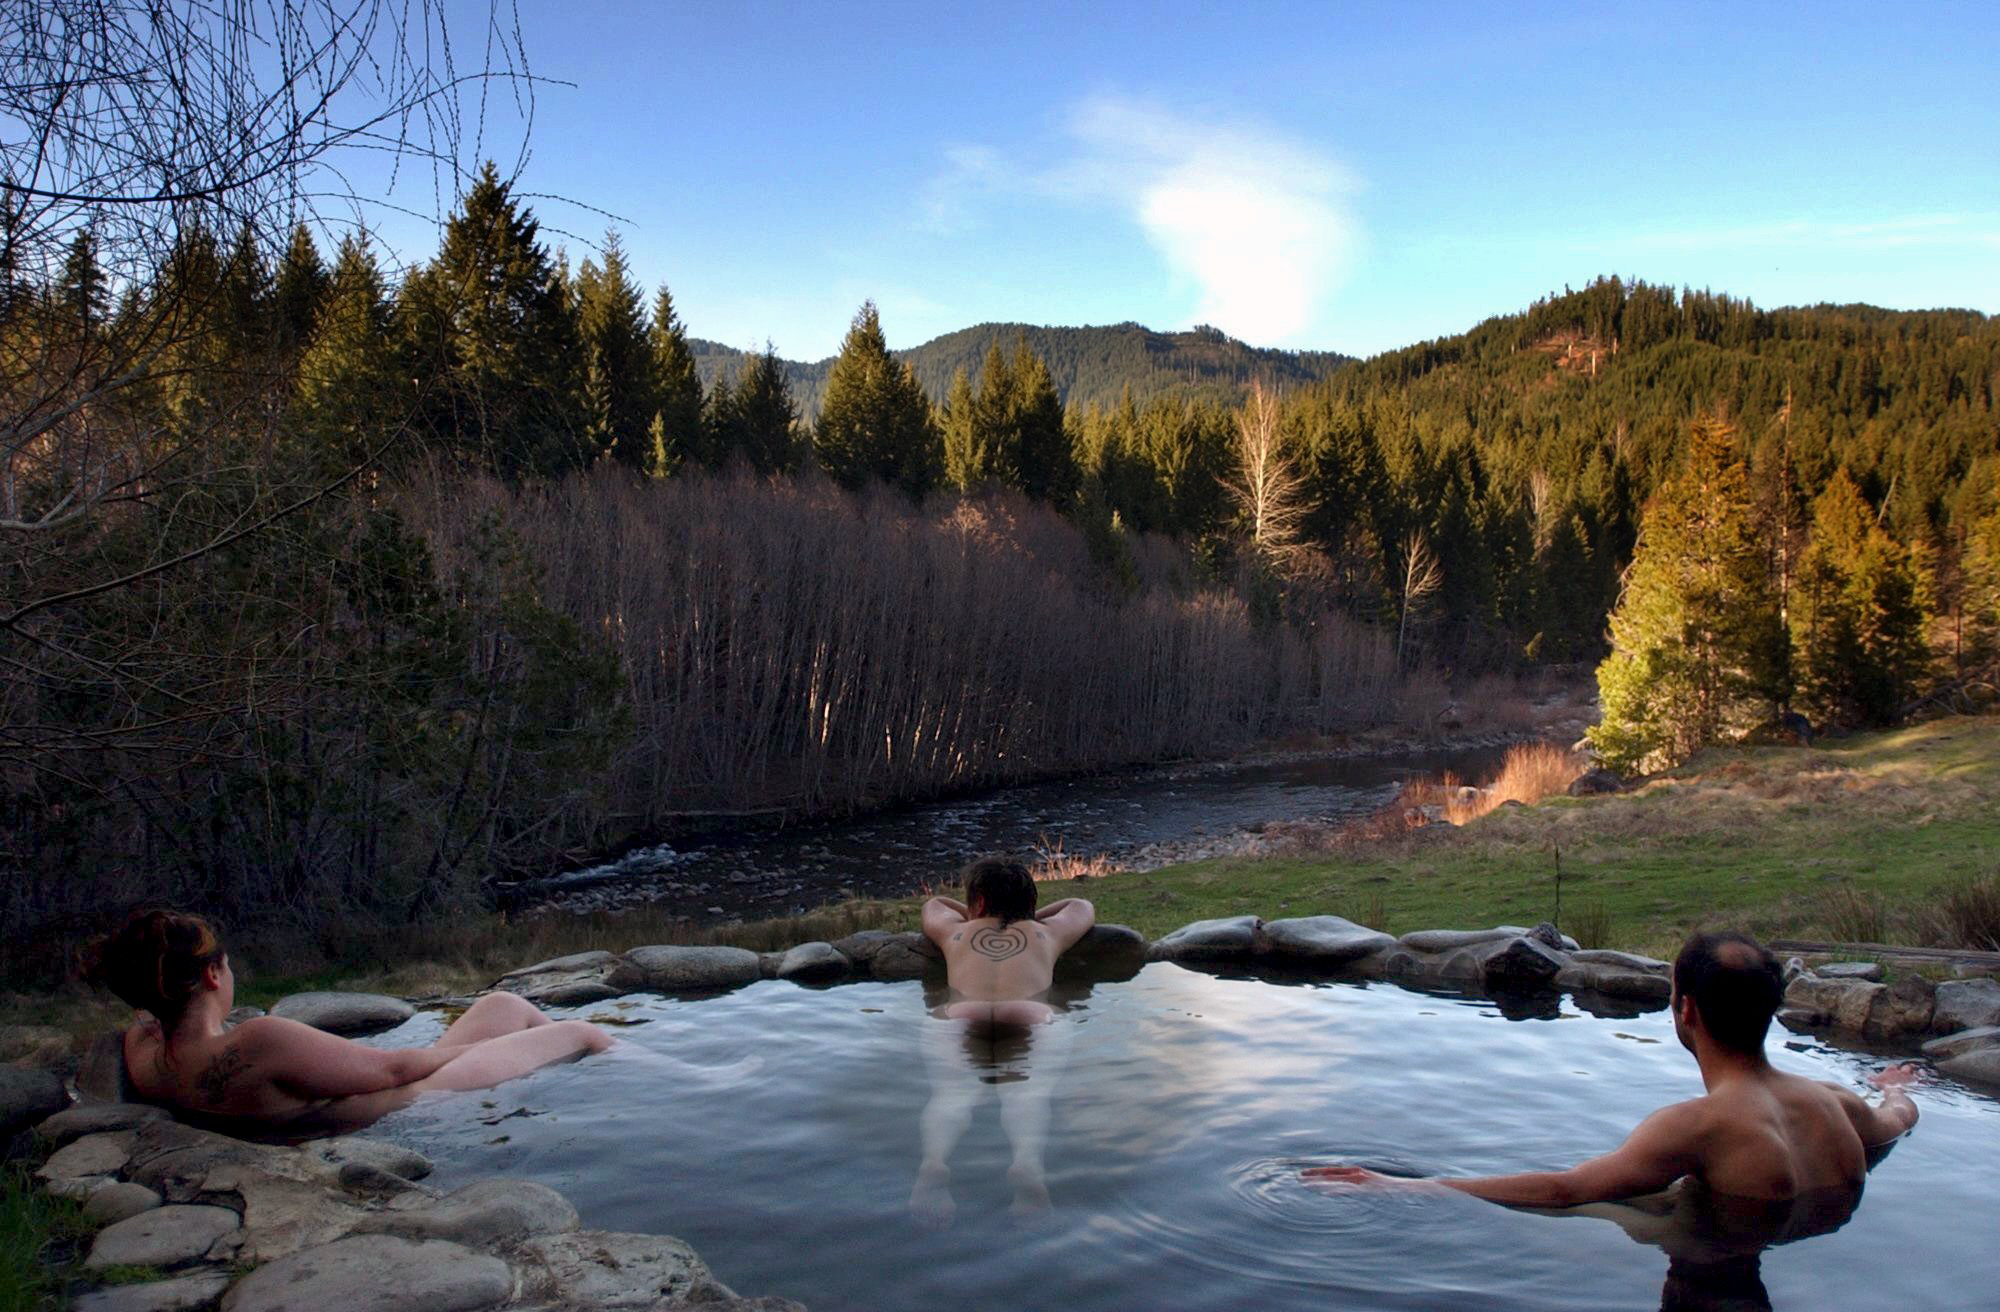 Breitenbush Hot Springs To Reopen With New Soaking Tubs Precautions Amid The Pandemic